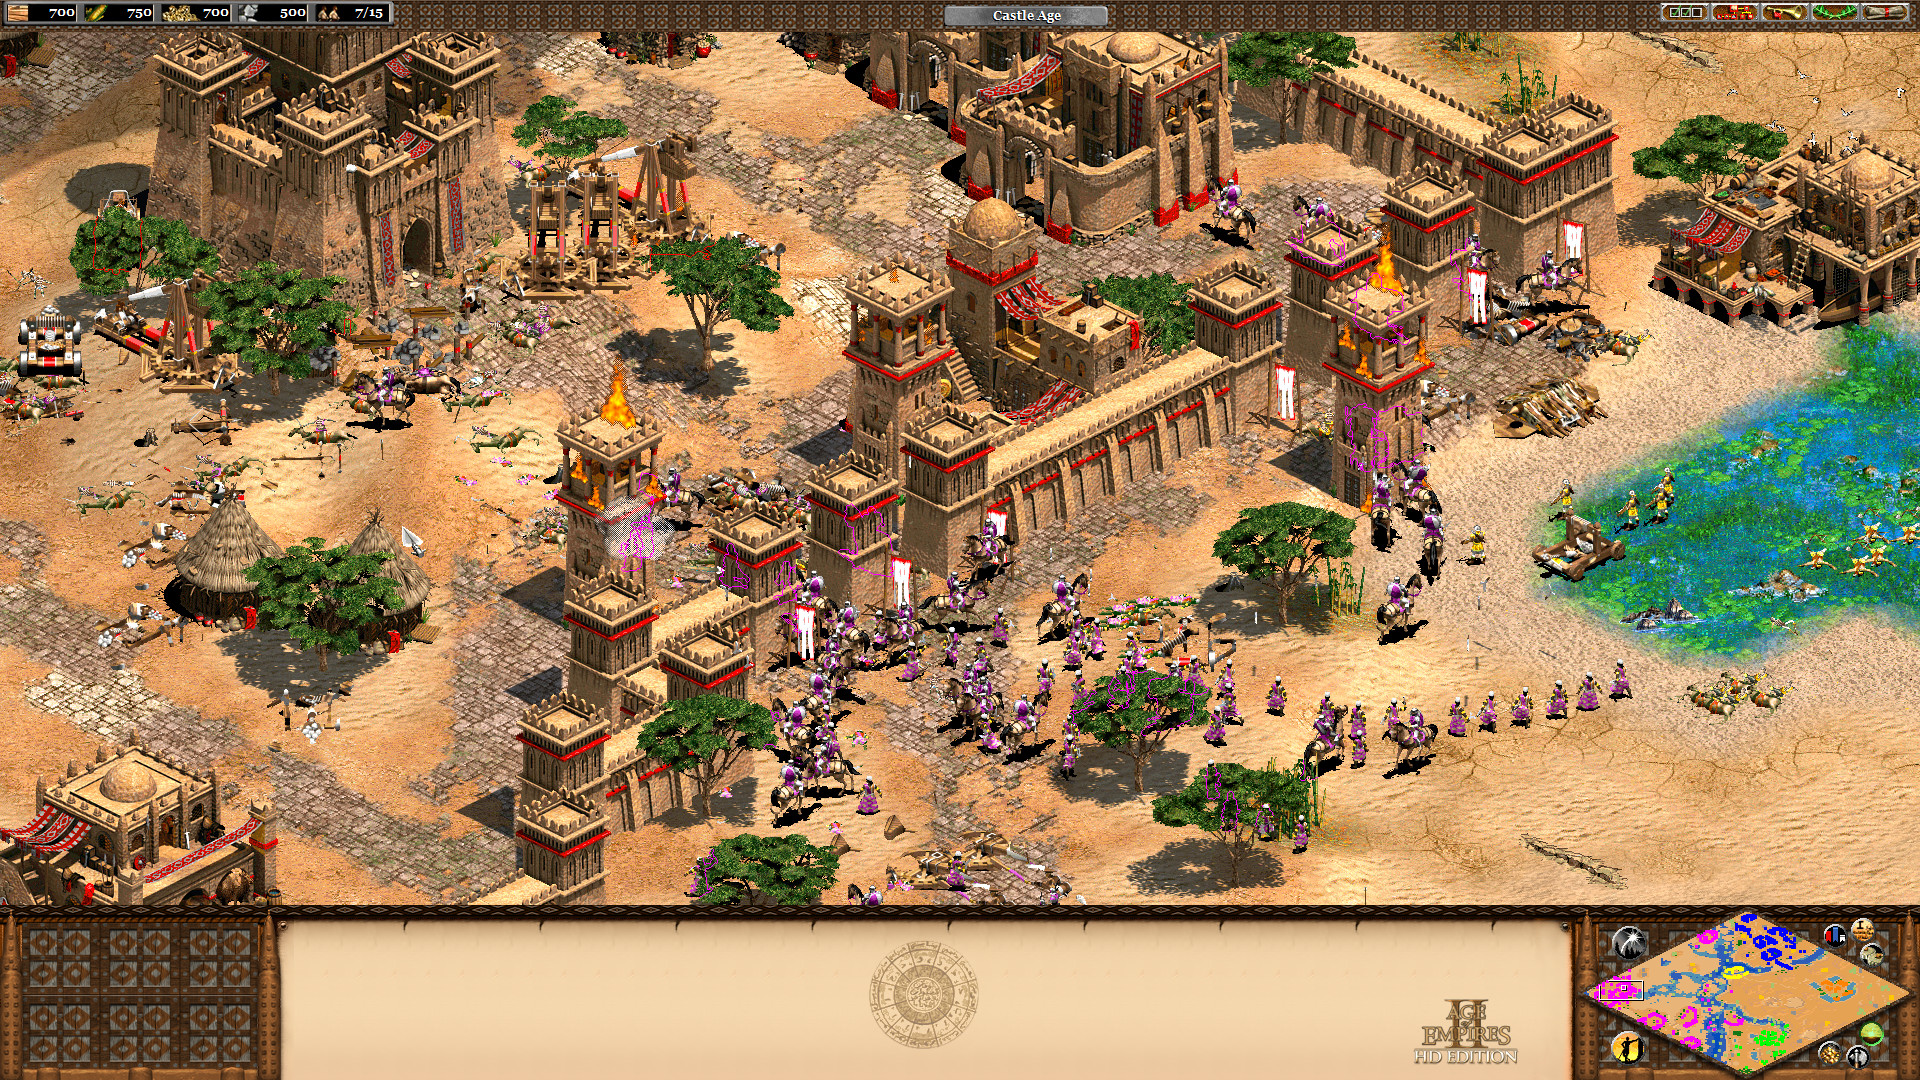 age of empires 2 hd free